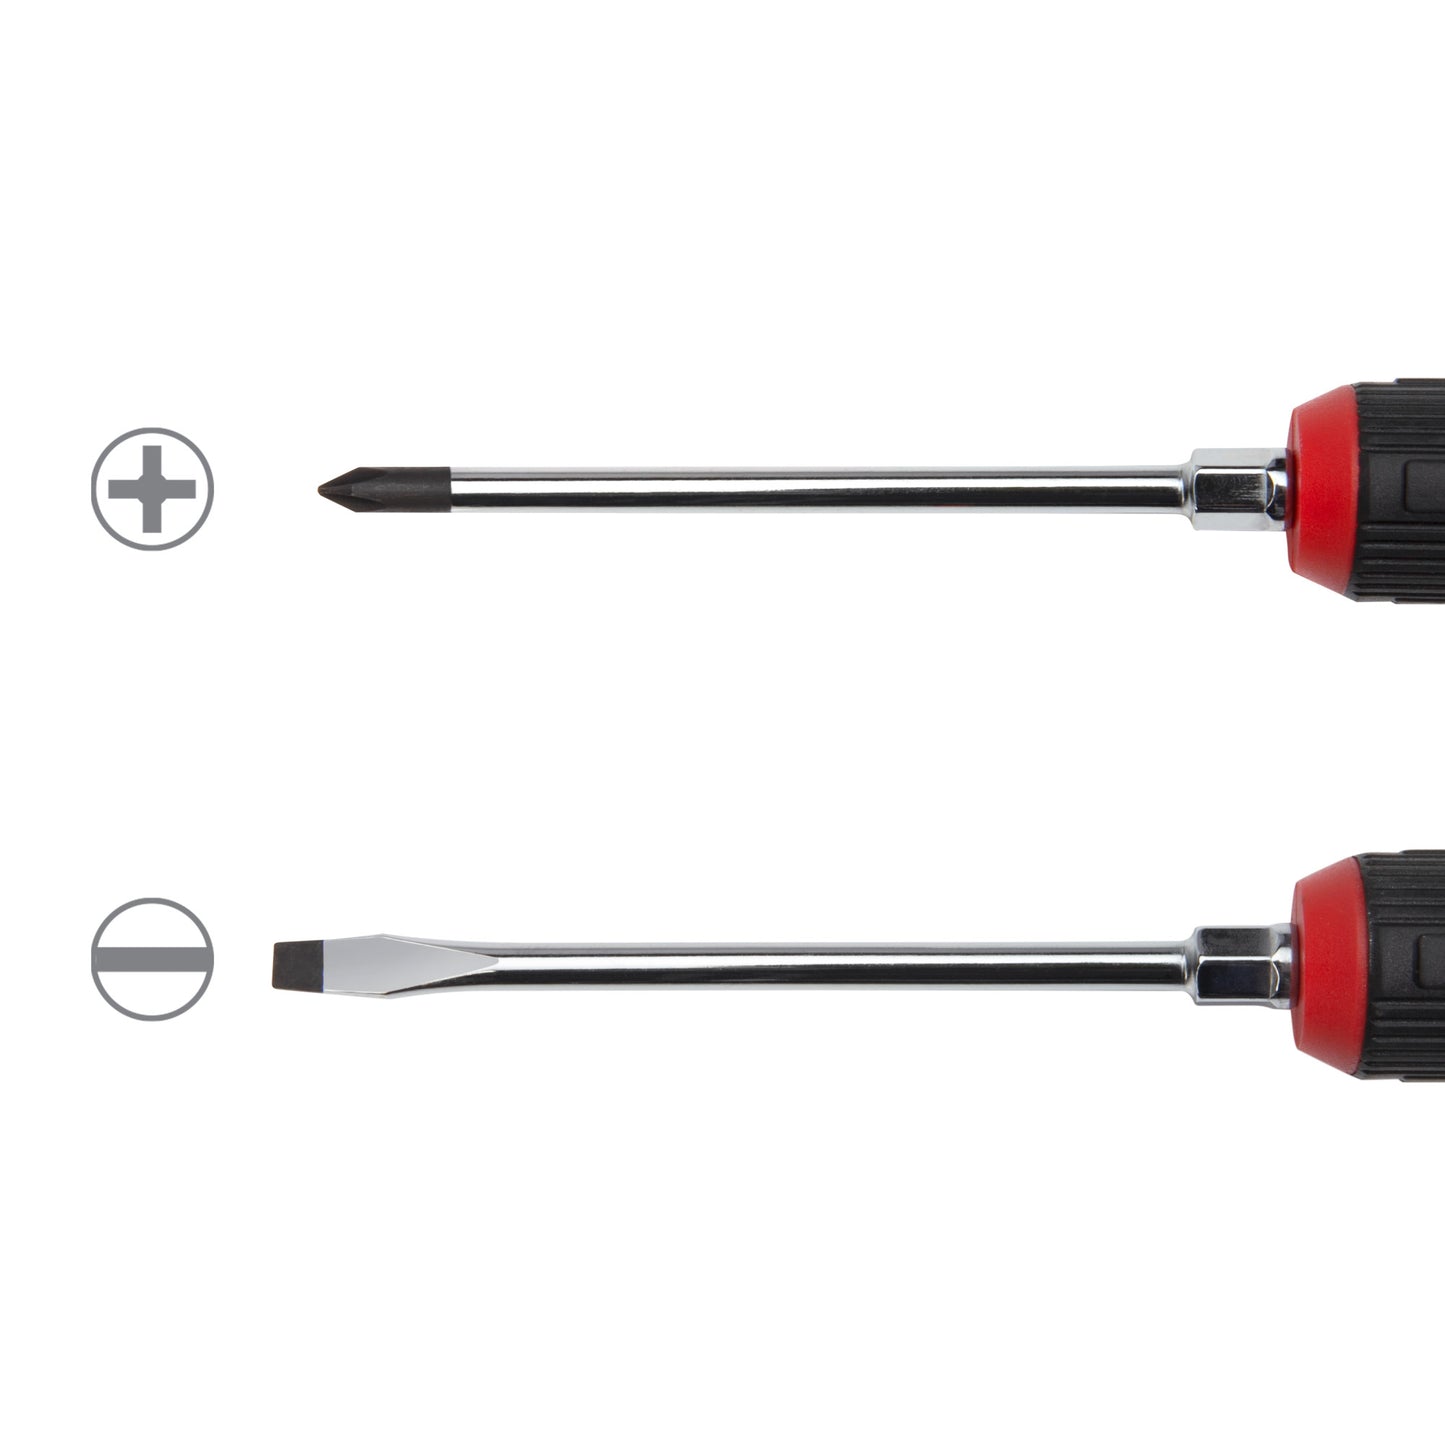 4-Piece Comfort Grip Phillips and Slotted Screwdriver Set